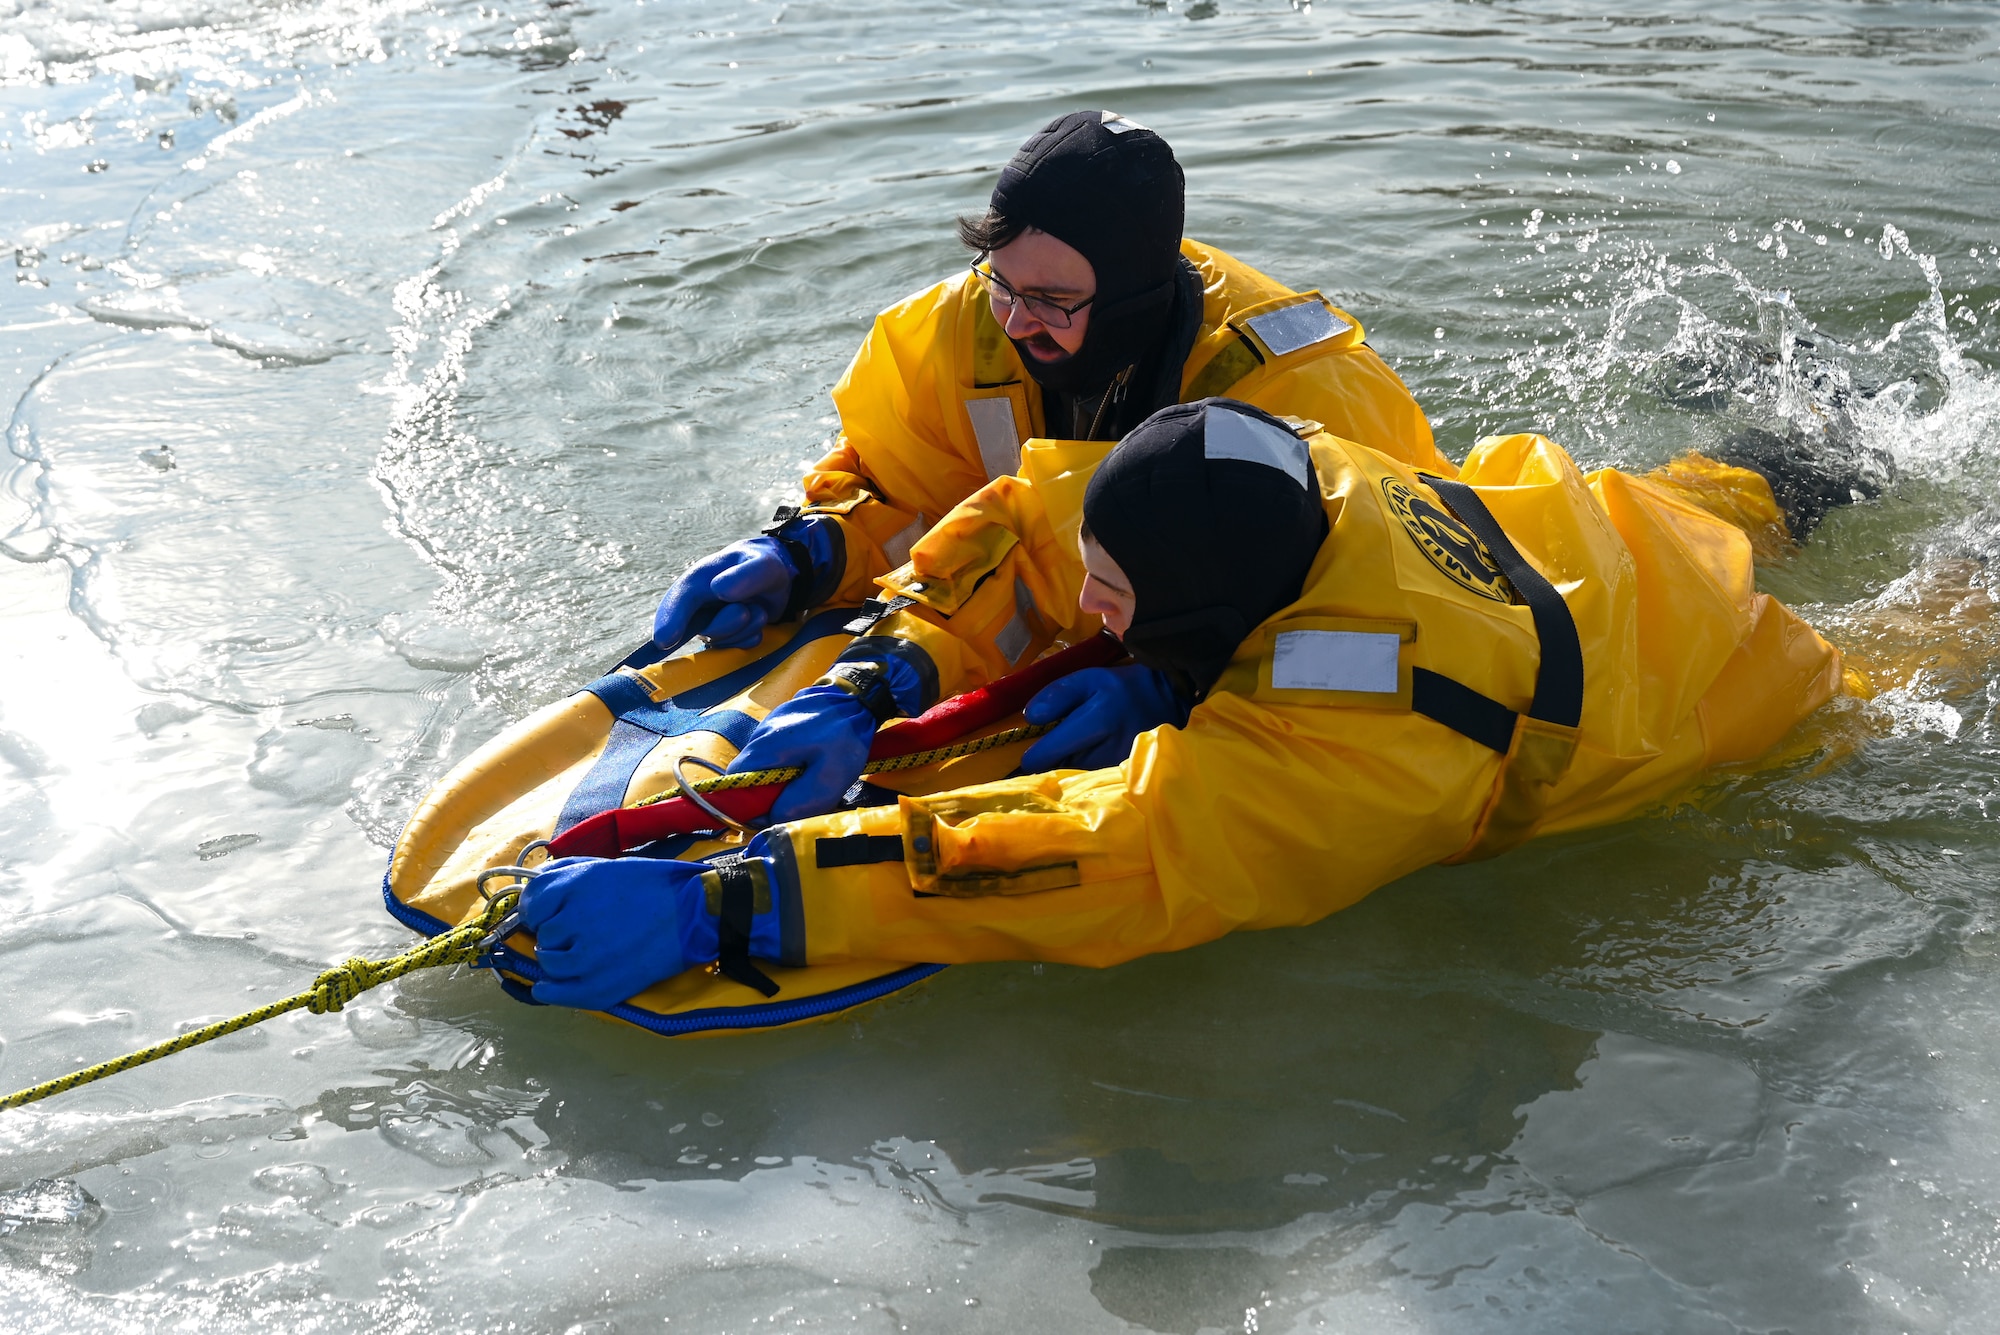 Airman in the Warren FD get pulled out of the ice during training.